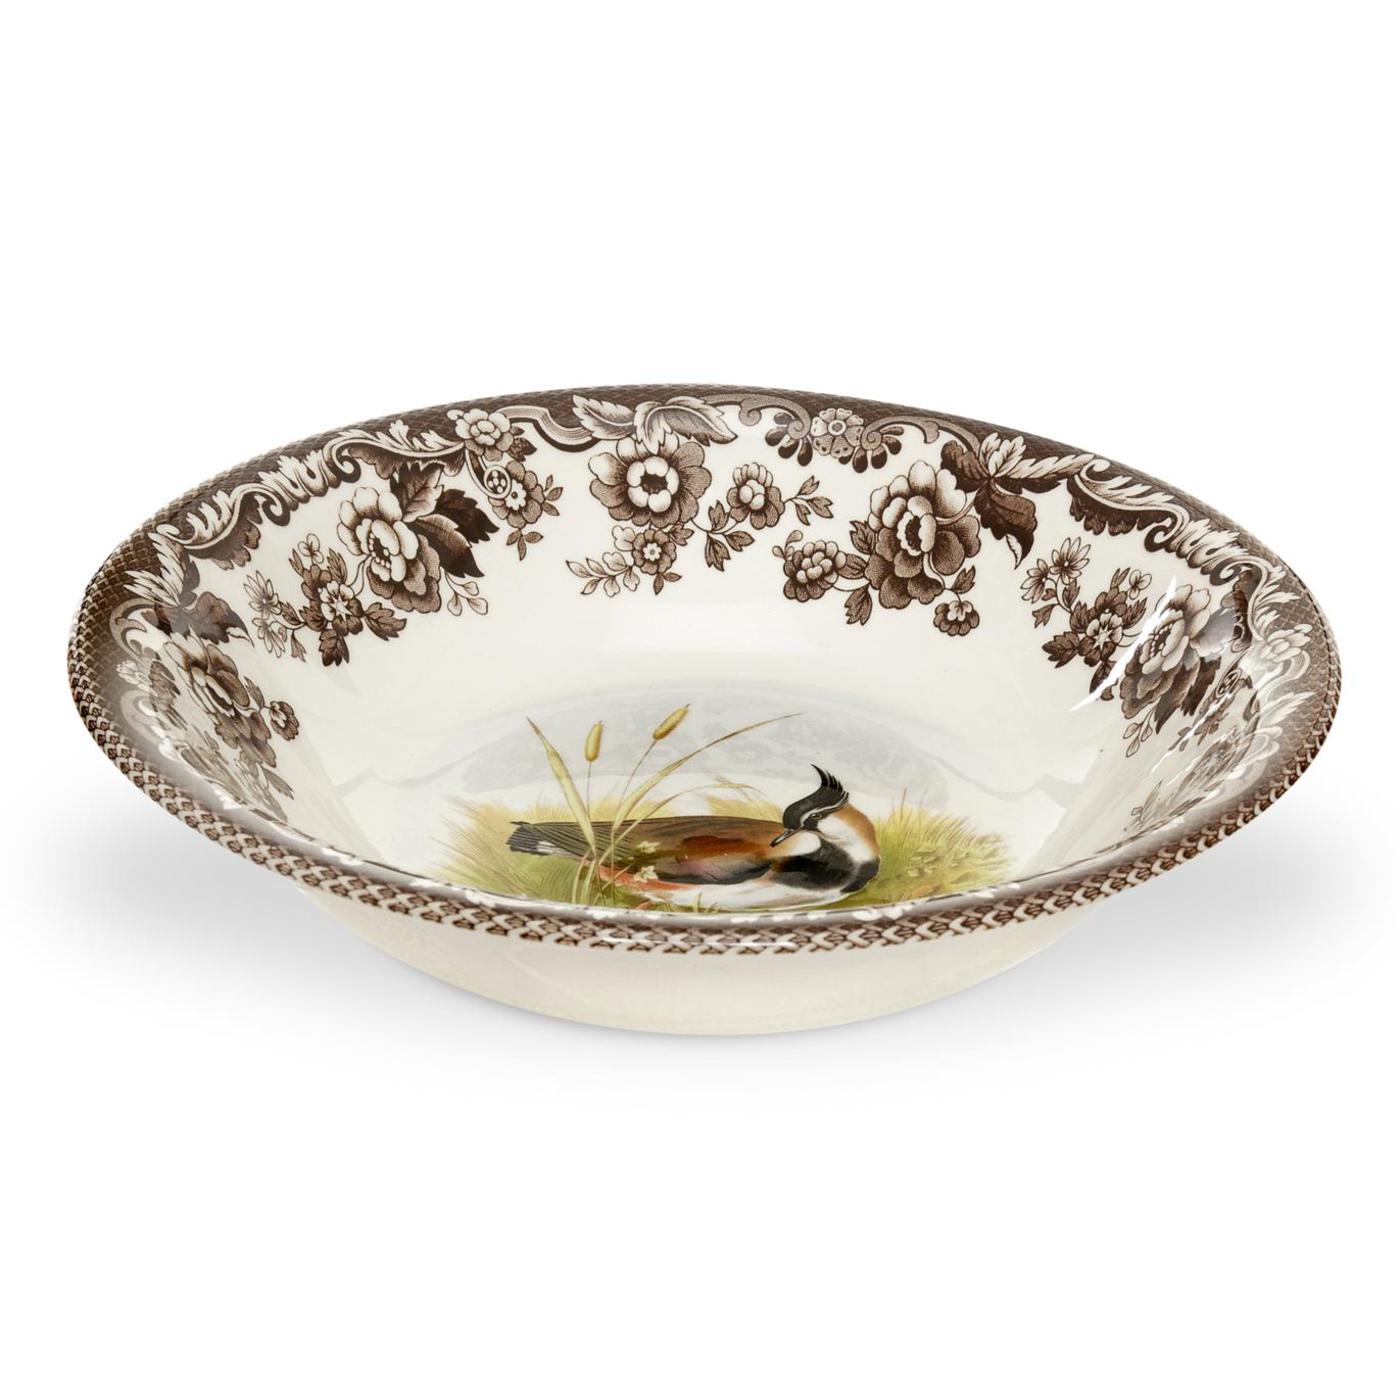 Spode Woodland Bird Cereal Bowl-LAPWING-Kevin's Fine Outdoor Gear & Apparel